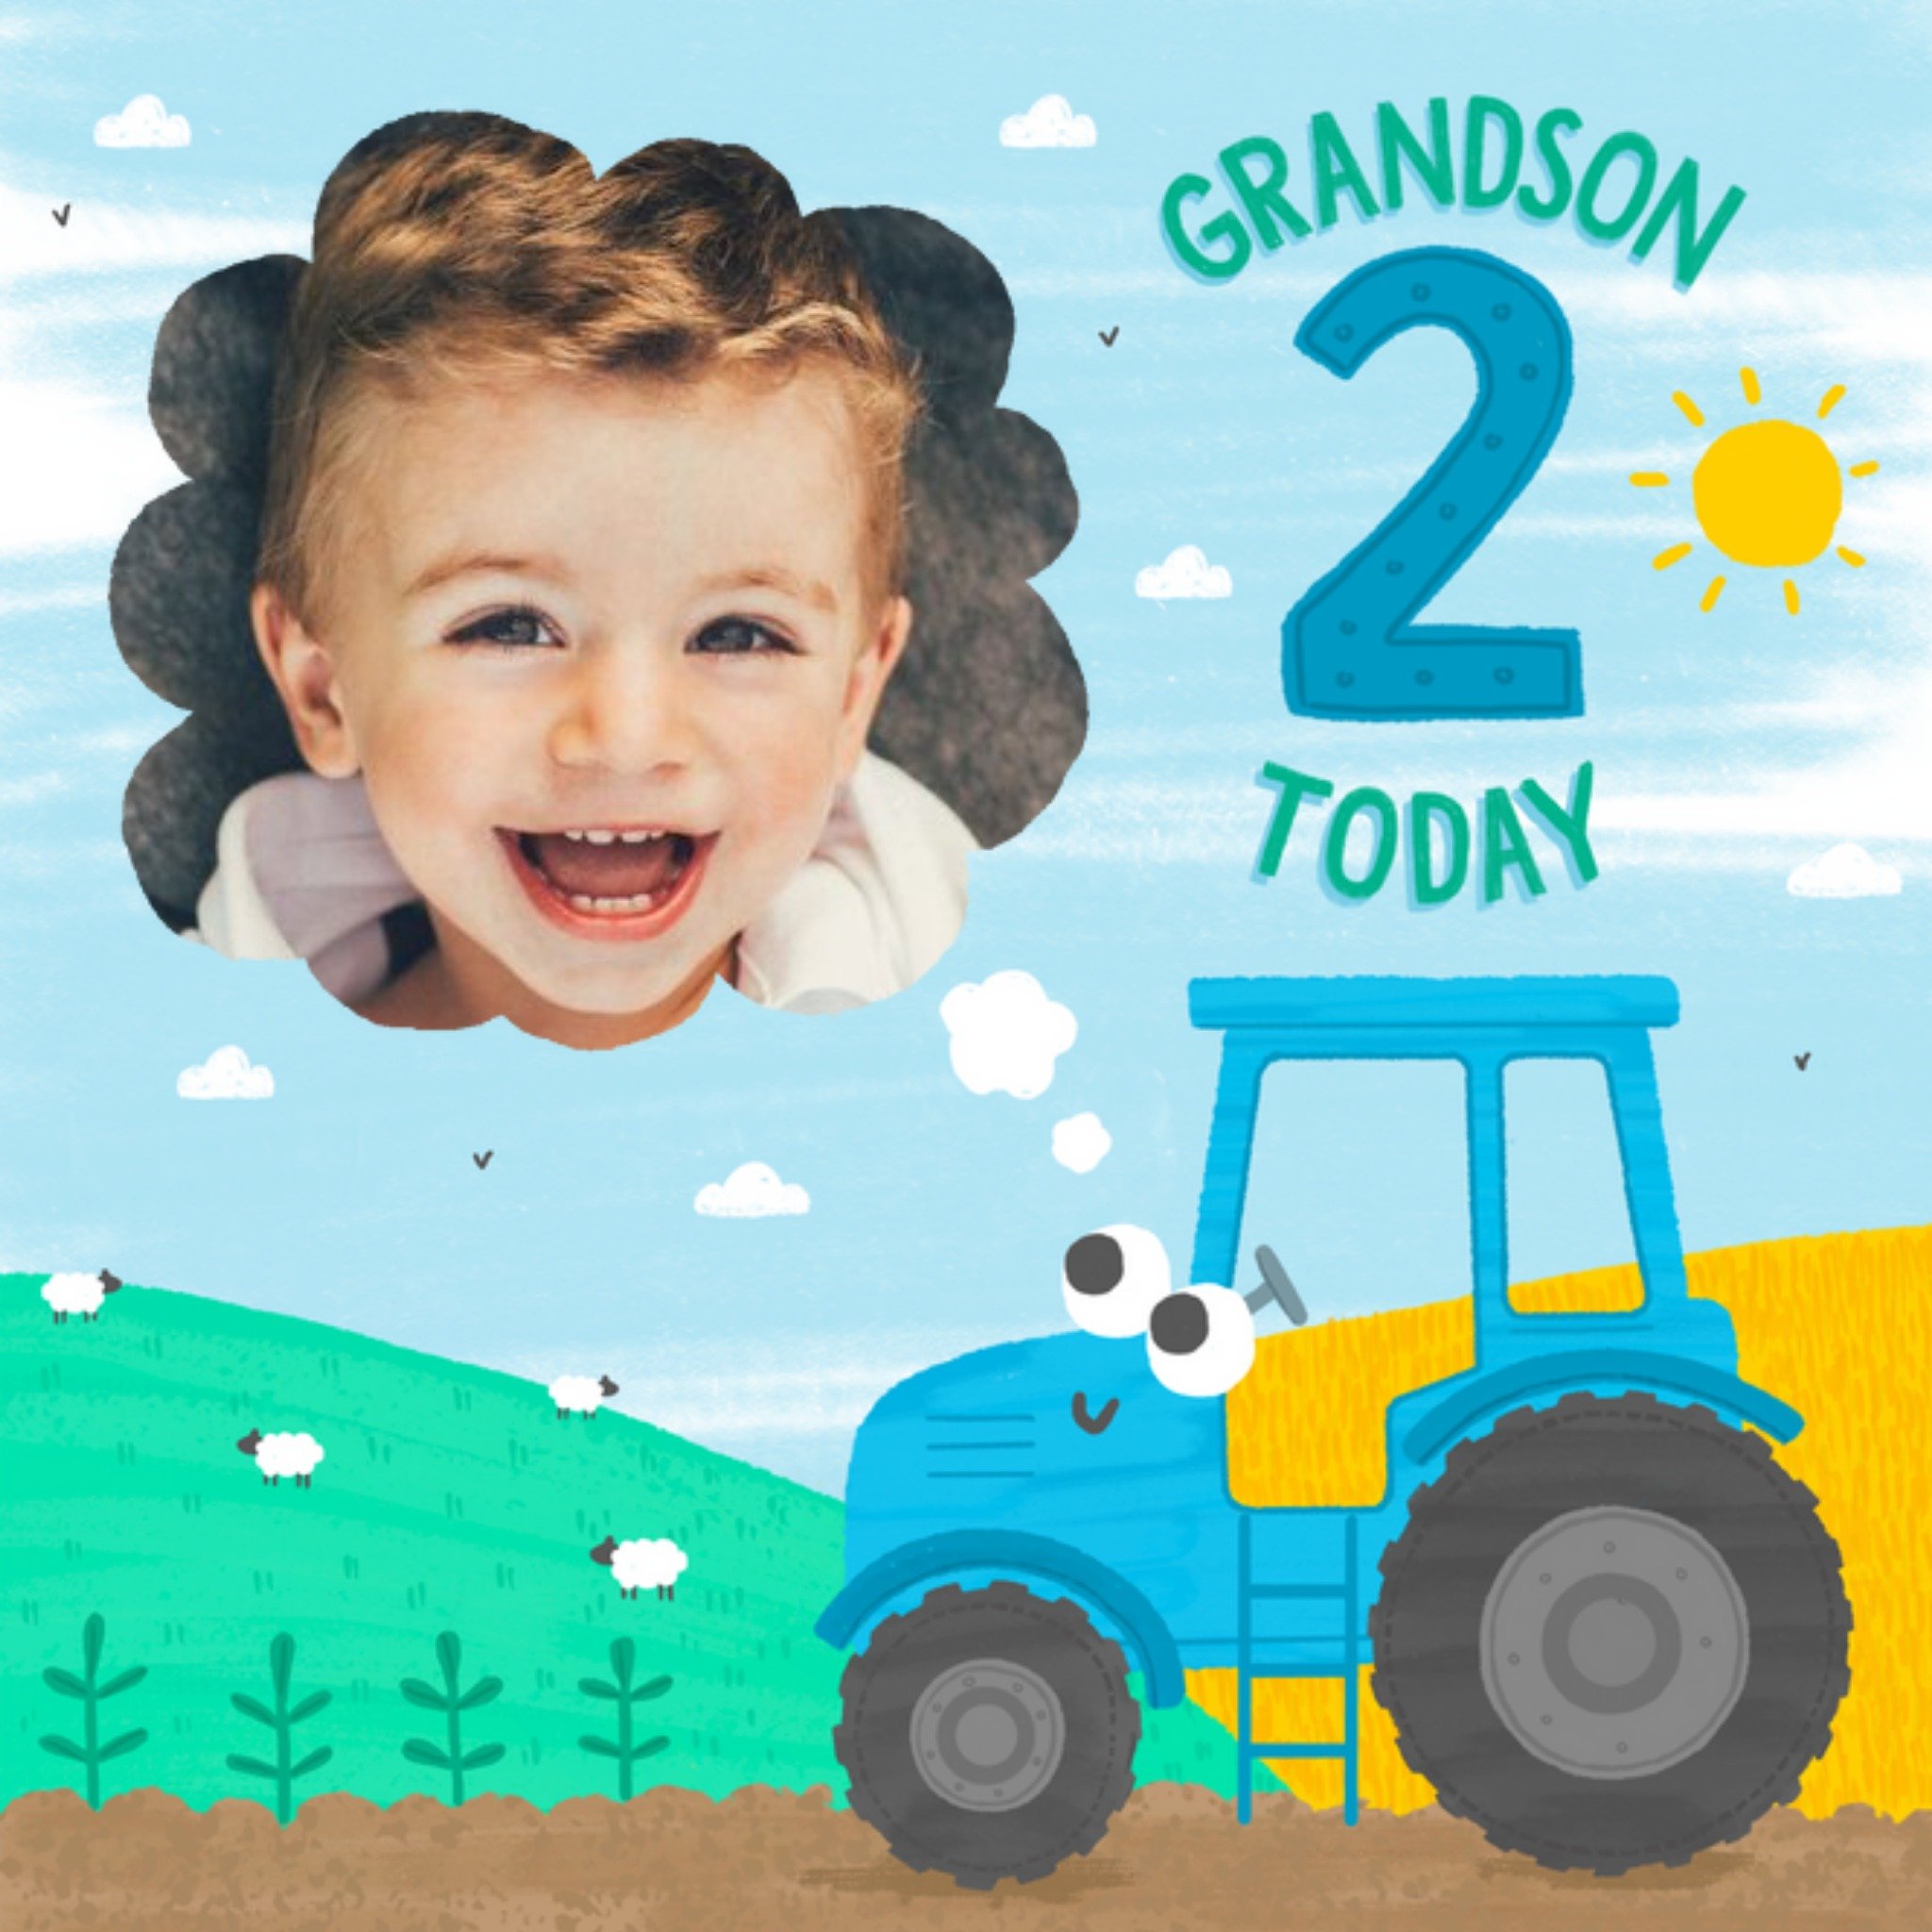 Moonpig Cute Tractor Grandson 2 Today Photo Upload Birthday Card, Large